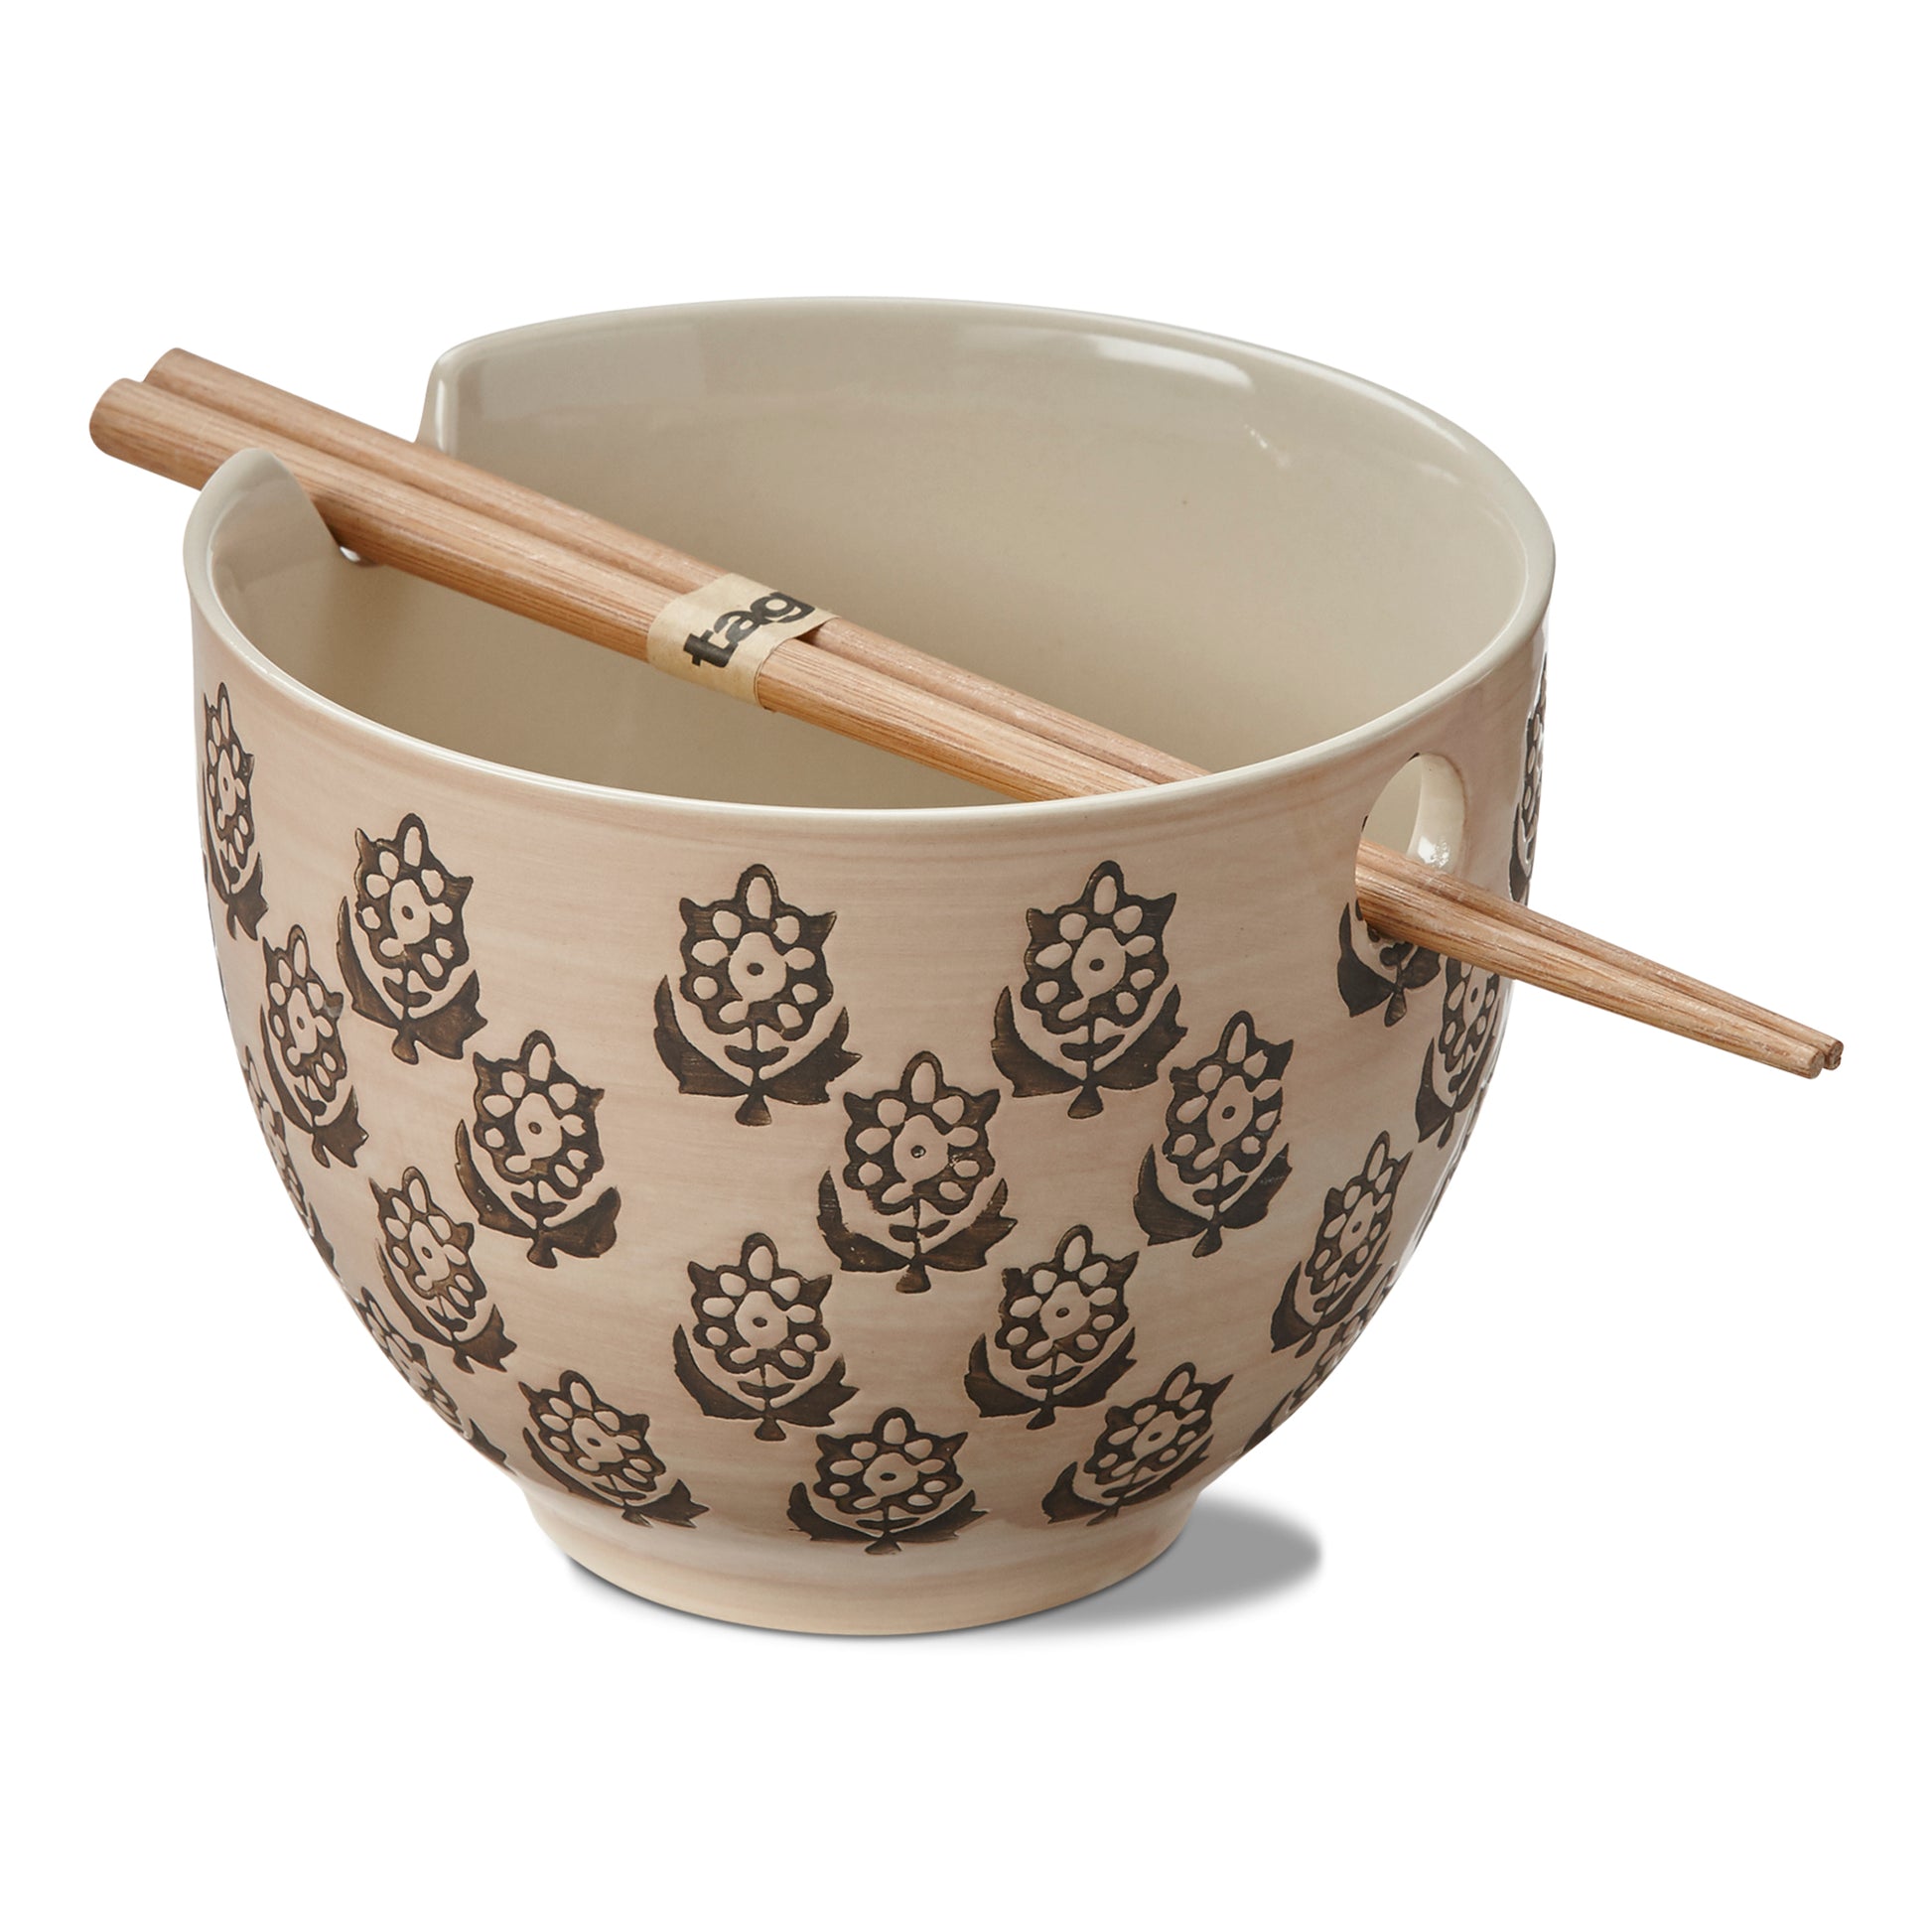 cream colored ceramic noddle bowl with flower design has chop sticks resting across the top on a white background.